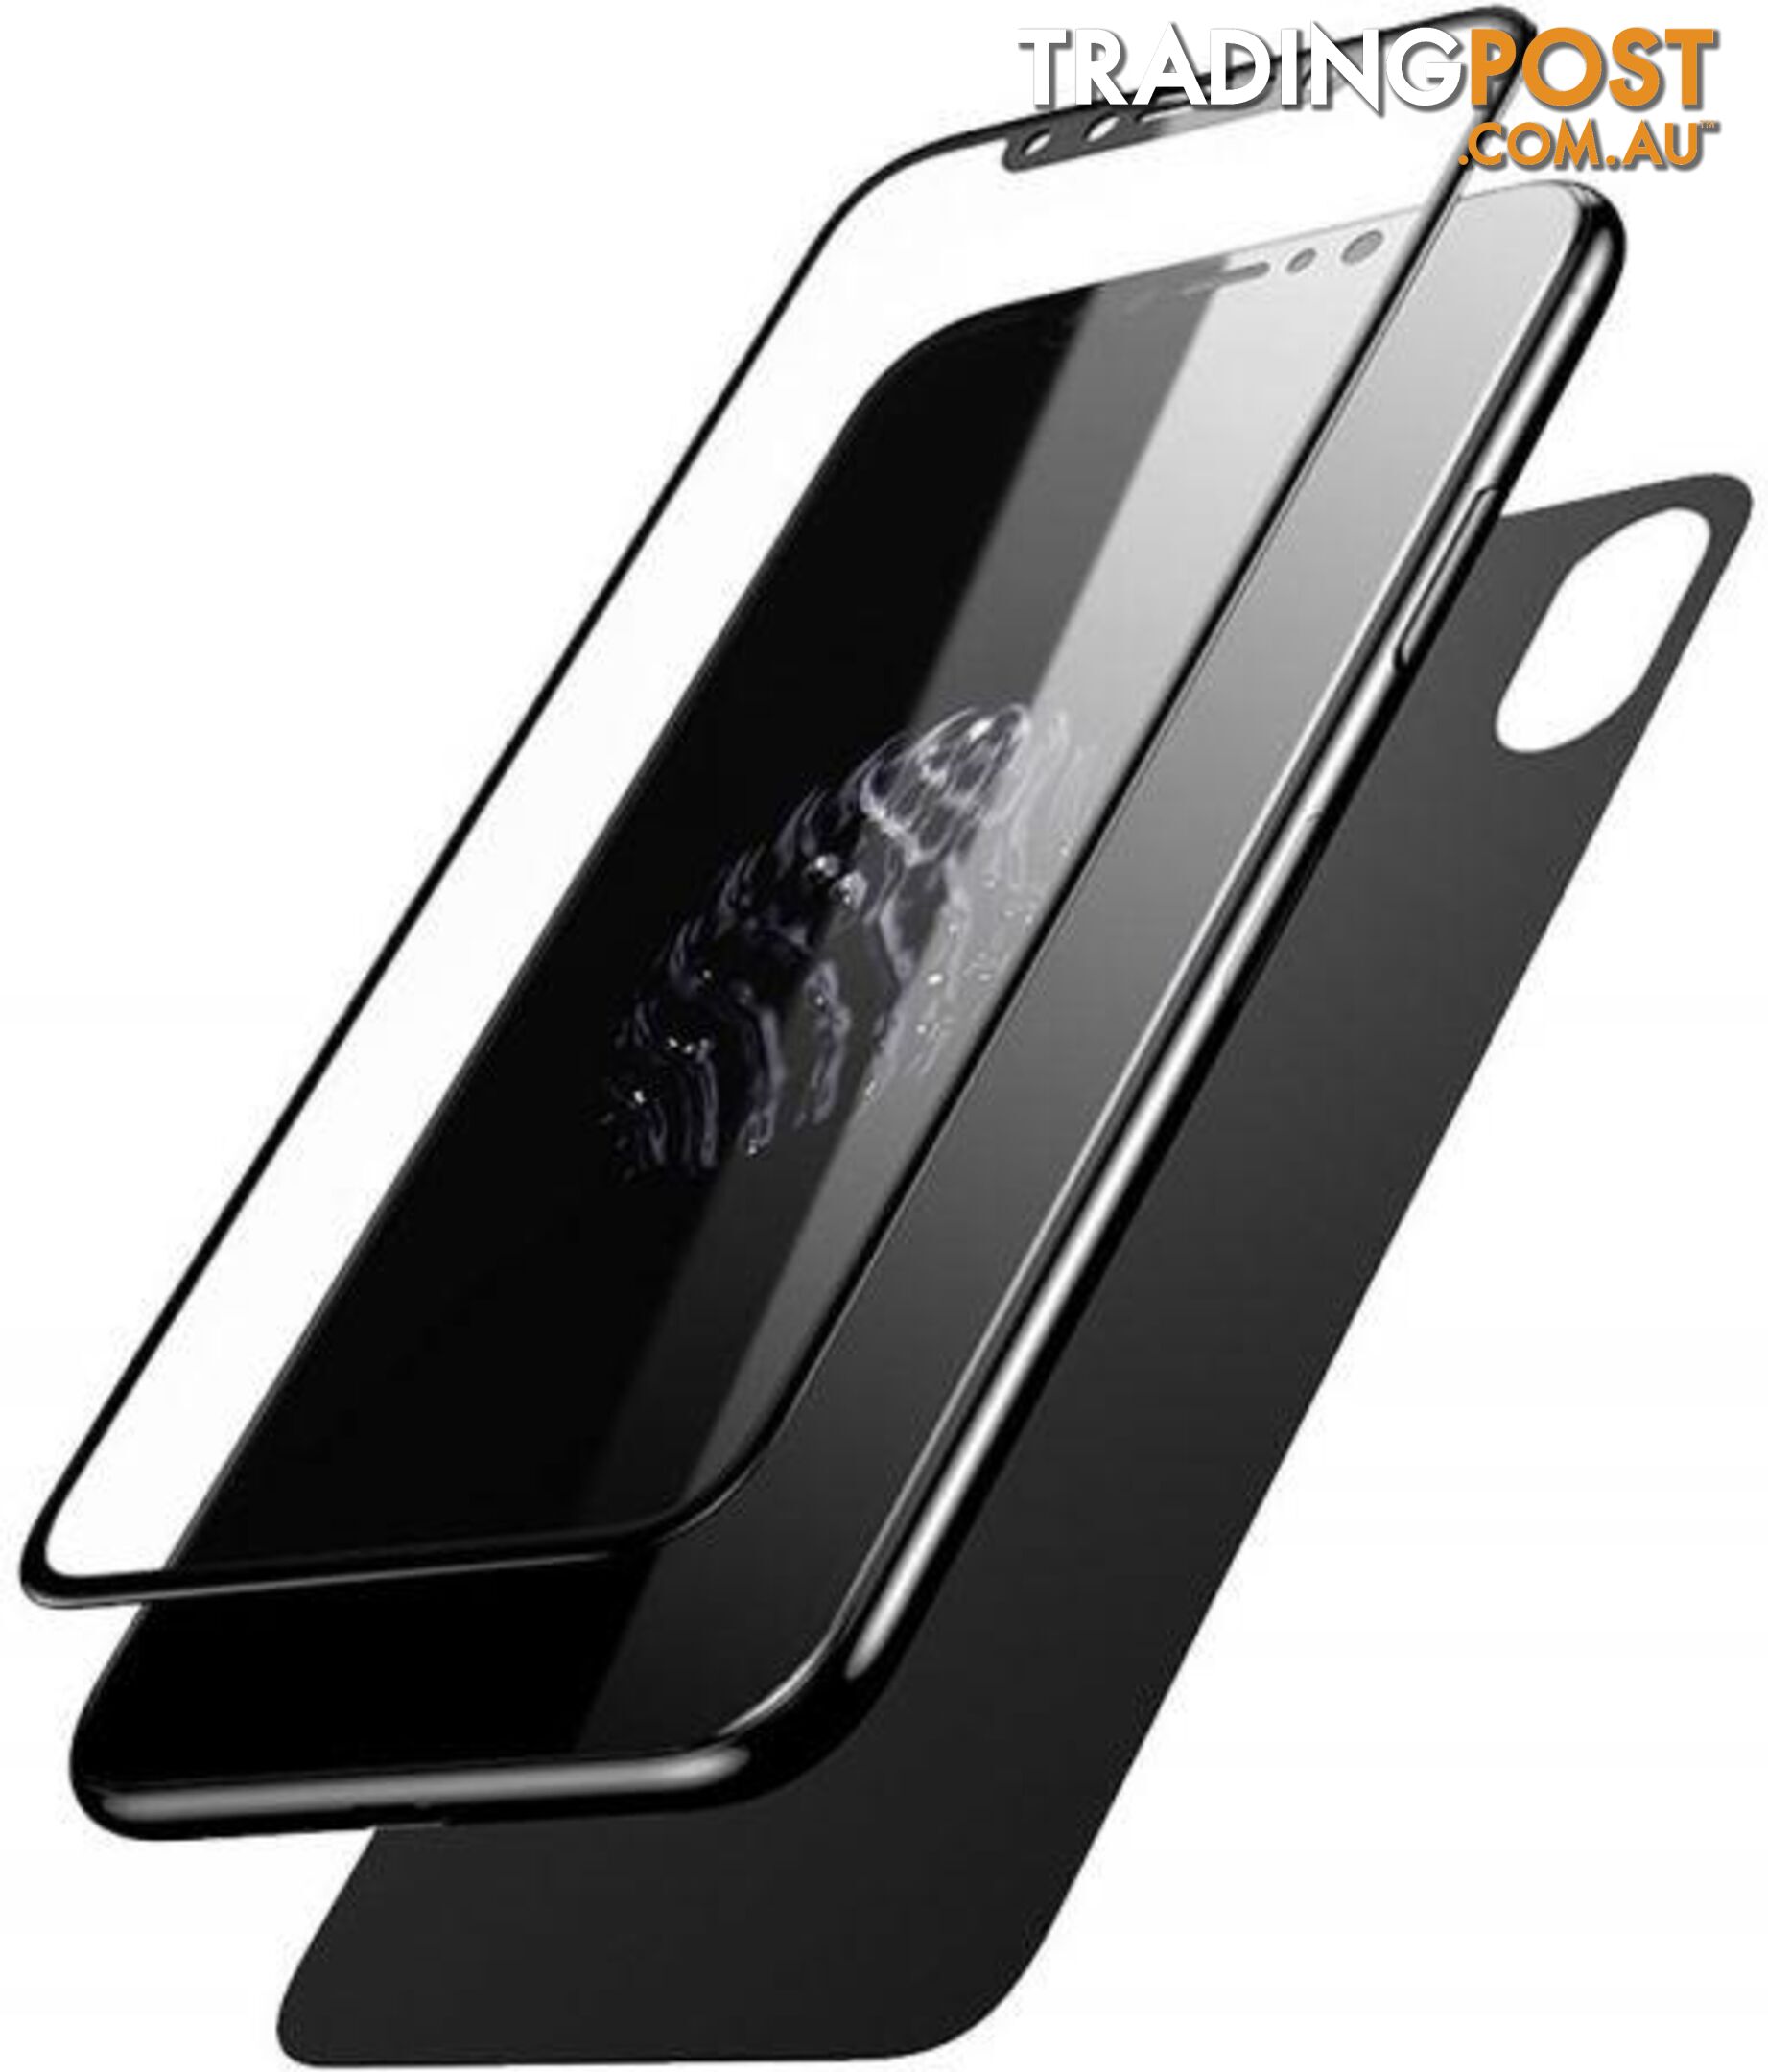 Baseus Glass Film Set Front and Back For iPhone X/Xs - Baseus - Black